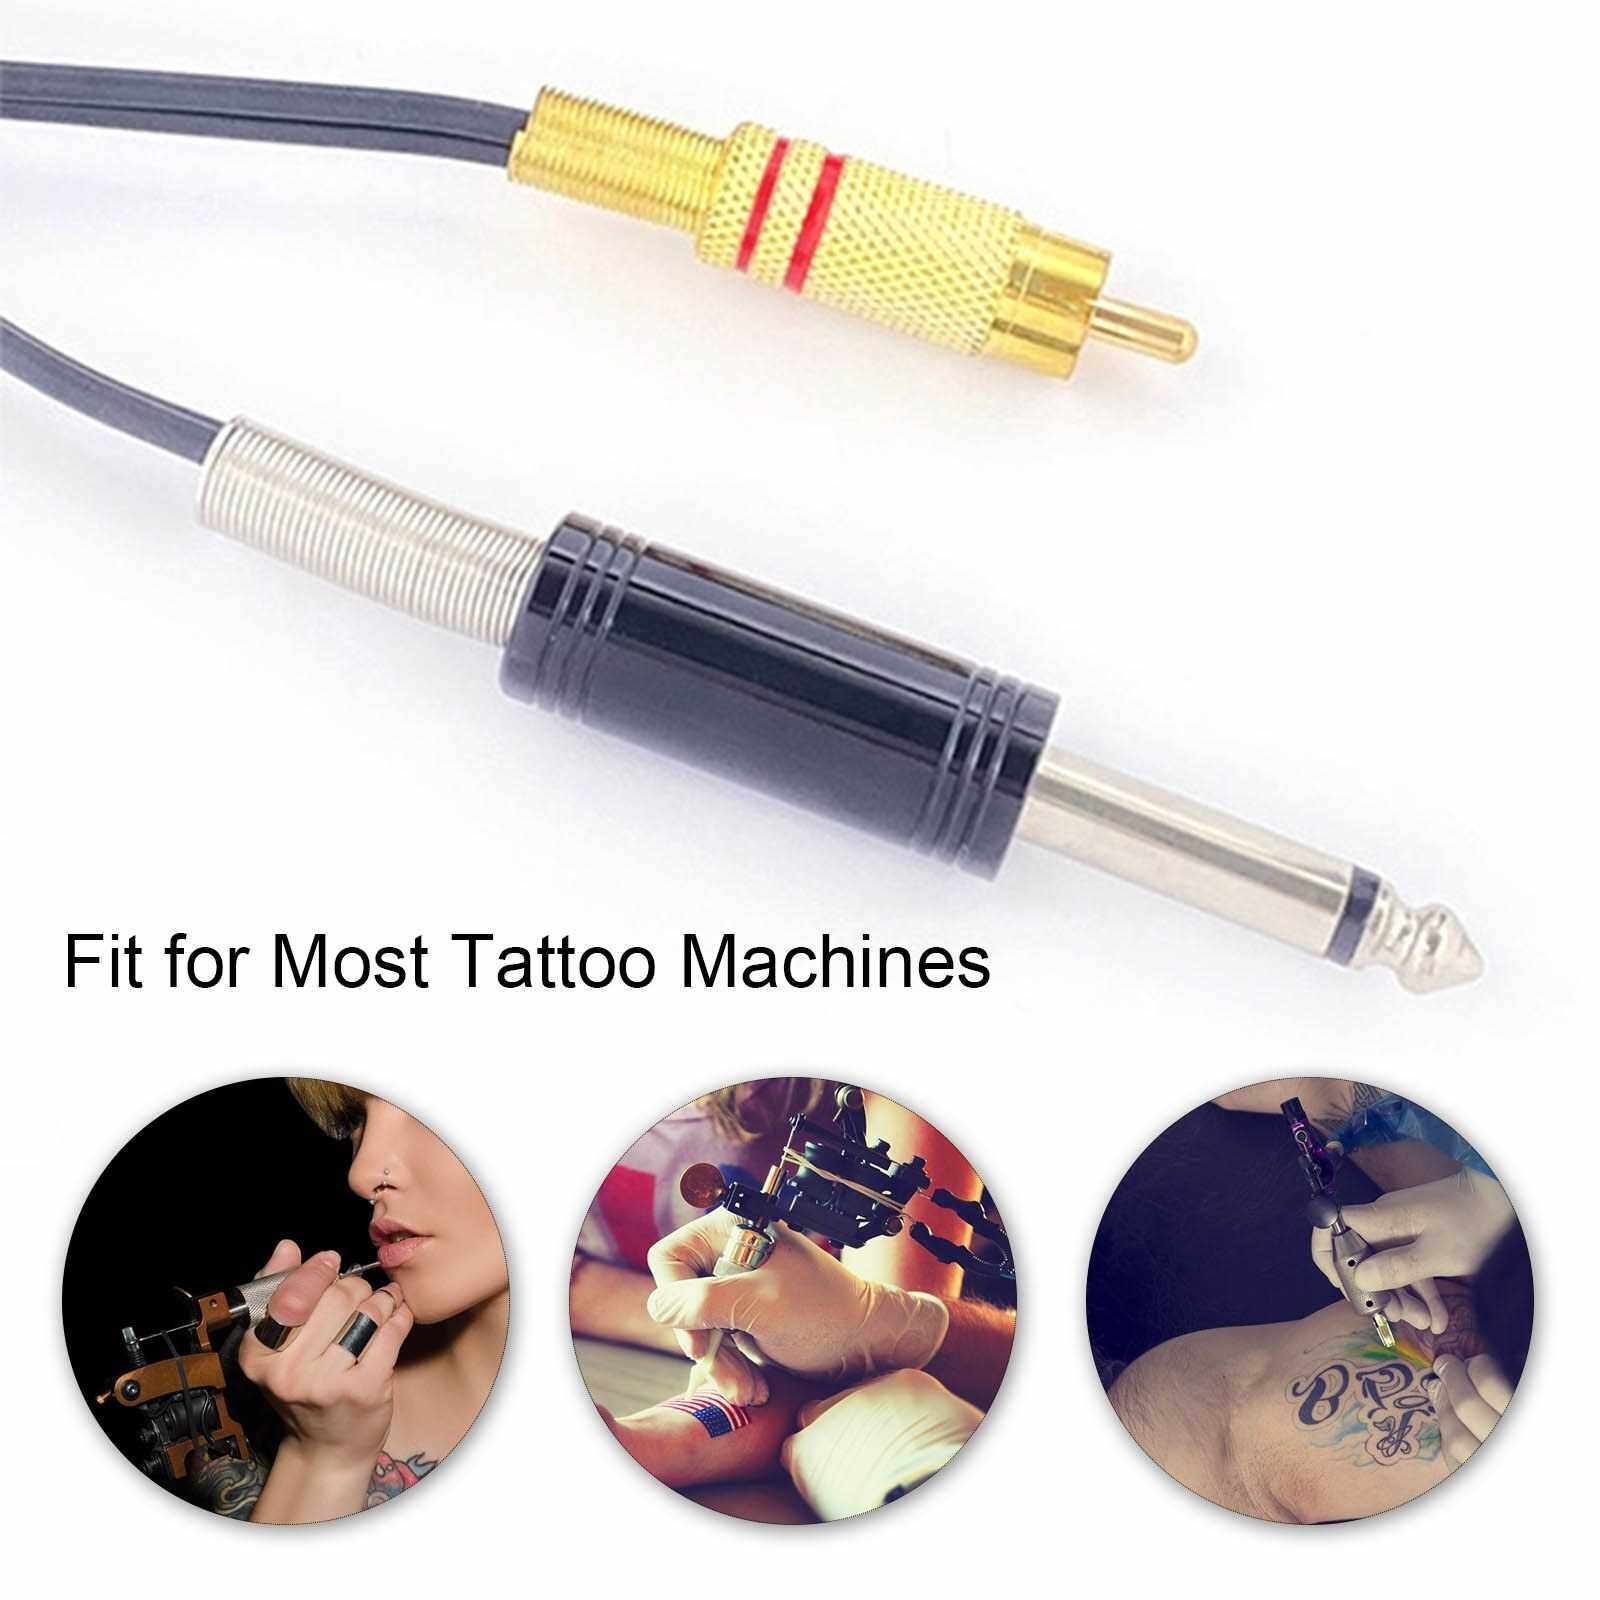 BEST SELLER Silicone Tattoo RCA Connector Cords Cable for Rotary Tattoo Pen Tattoo Machines Power Cord Ultra Soft (Red)